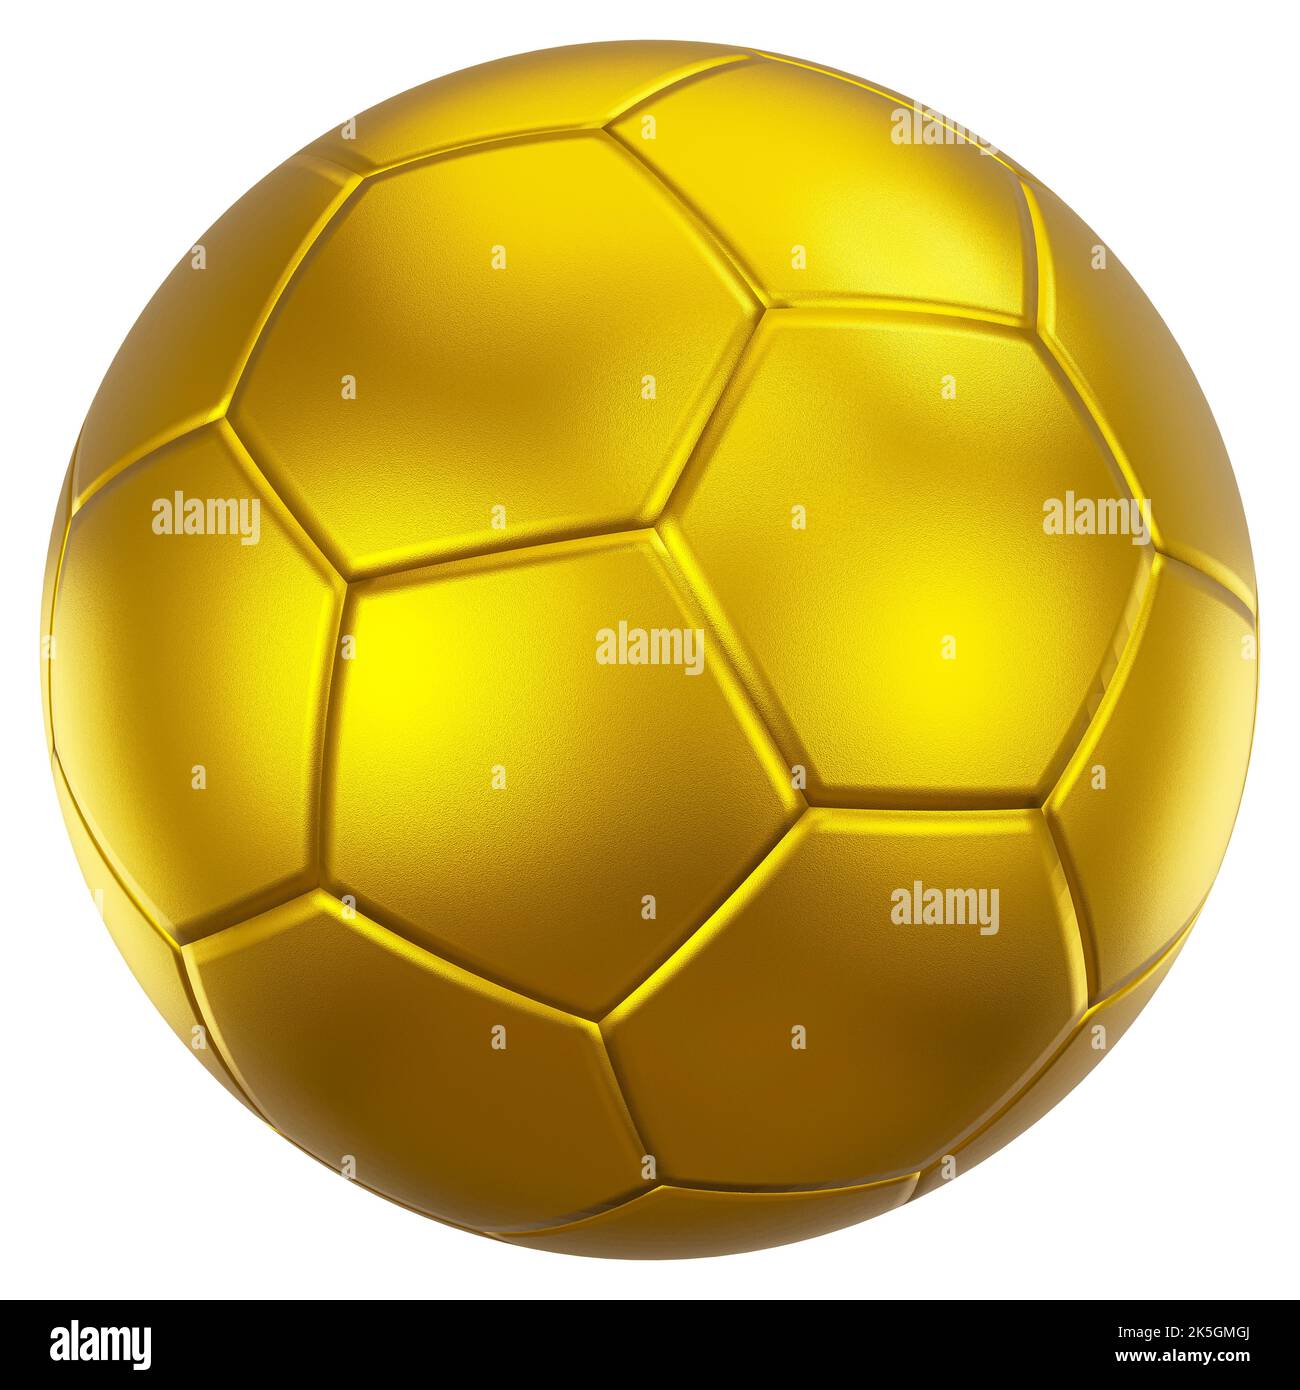 Golden soccer ball or football with leather texture . Isolated . Embedded clipping paths . 3D rendering . Stock Photo